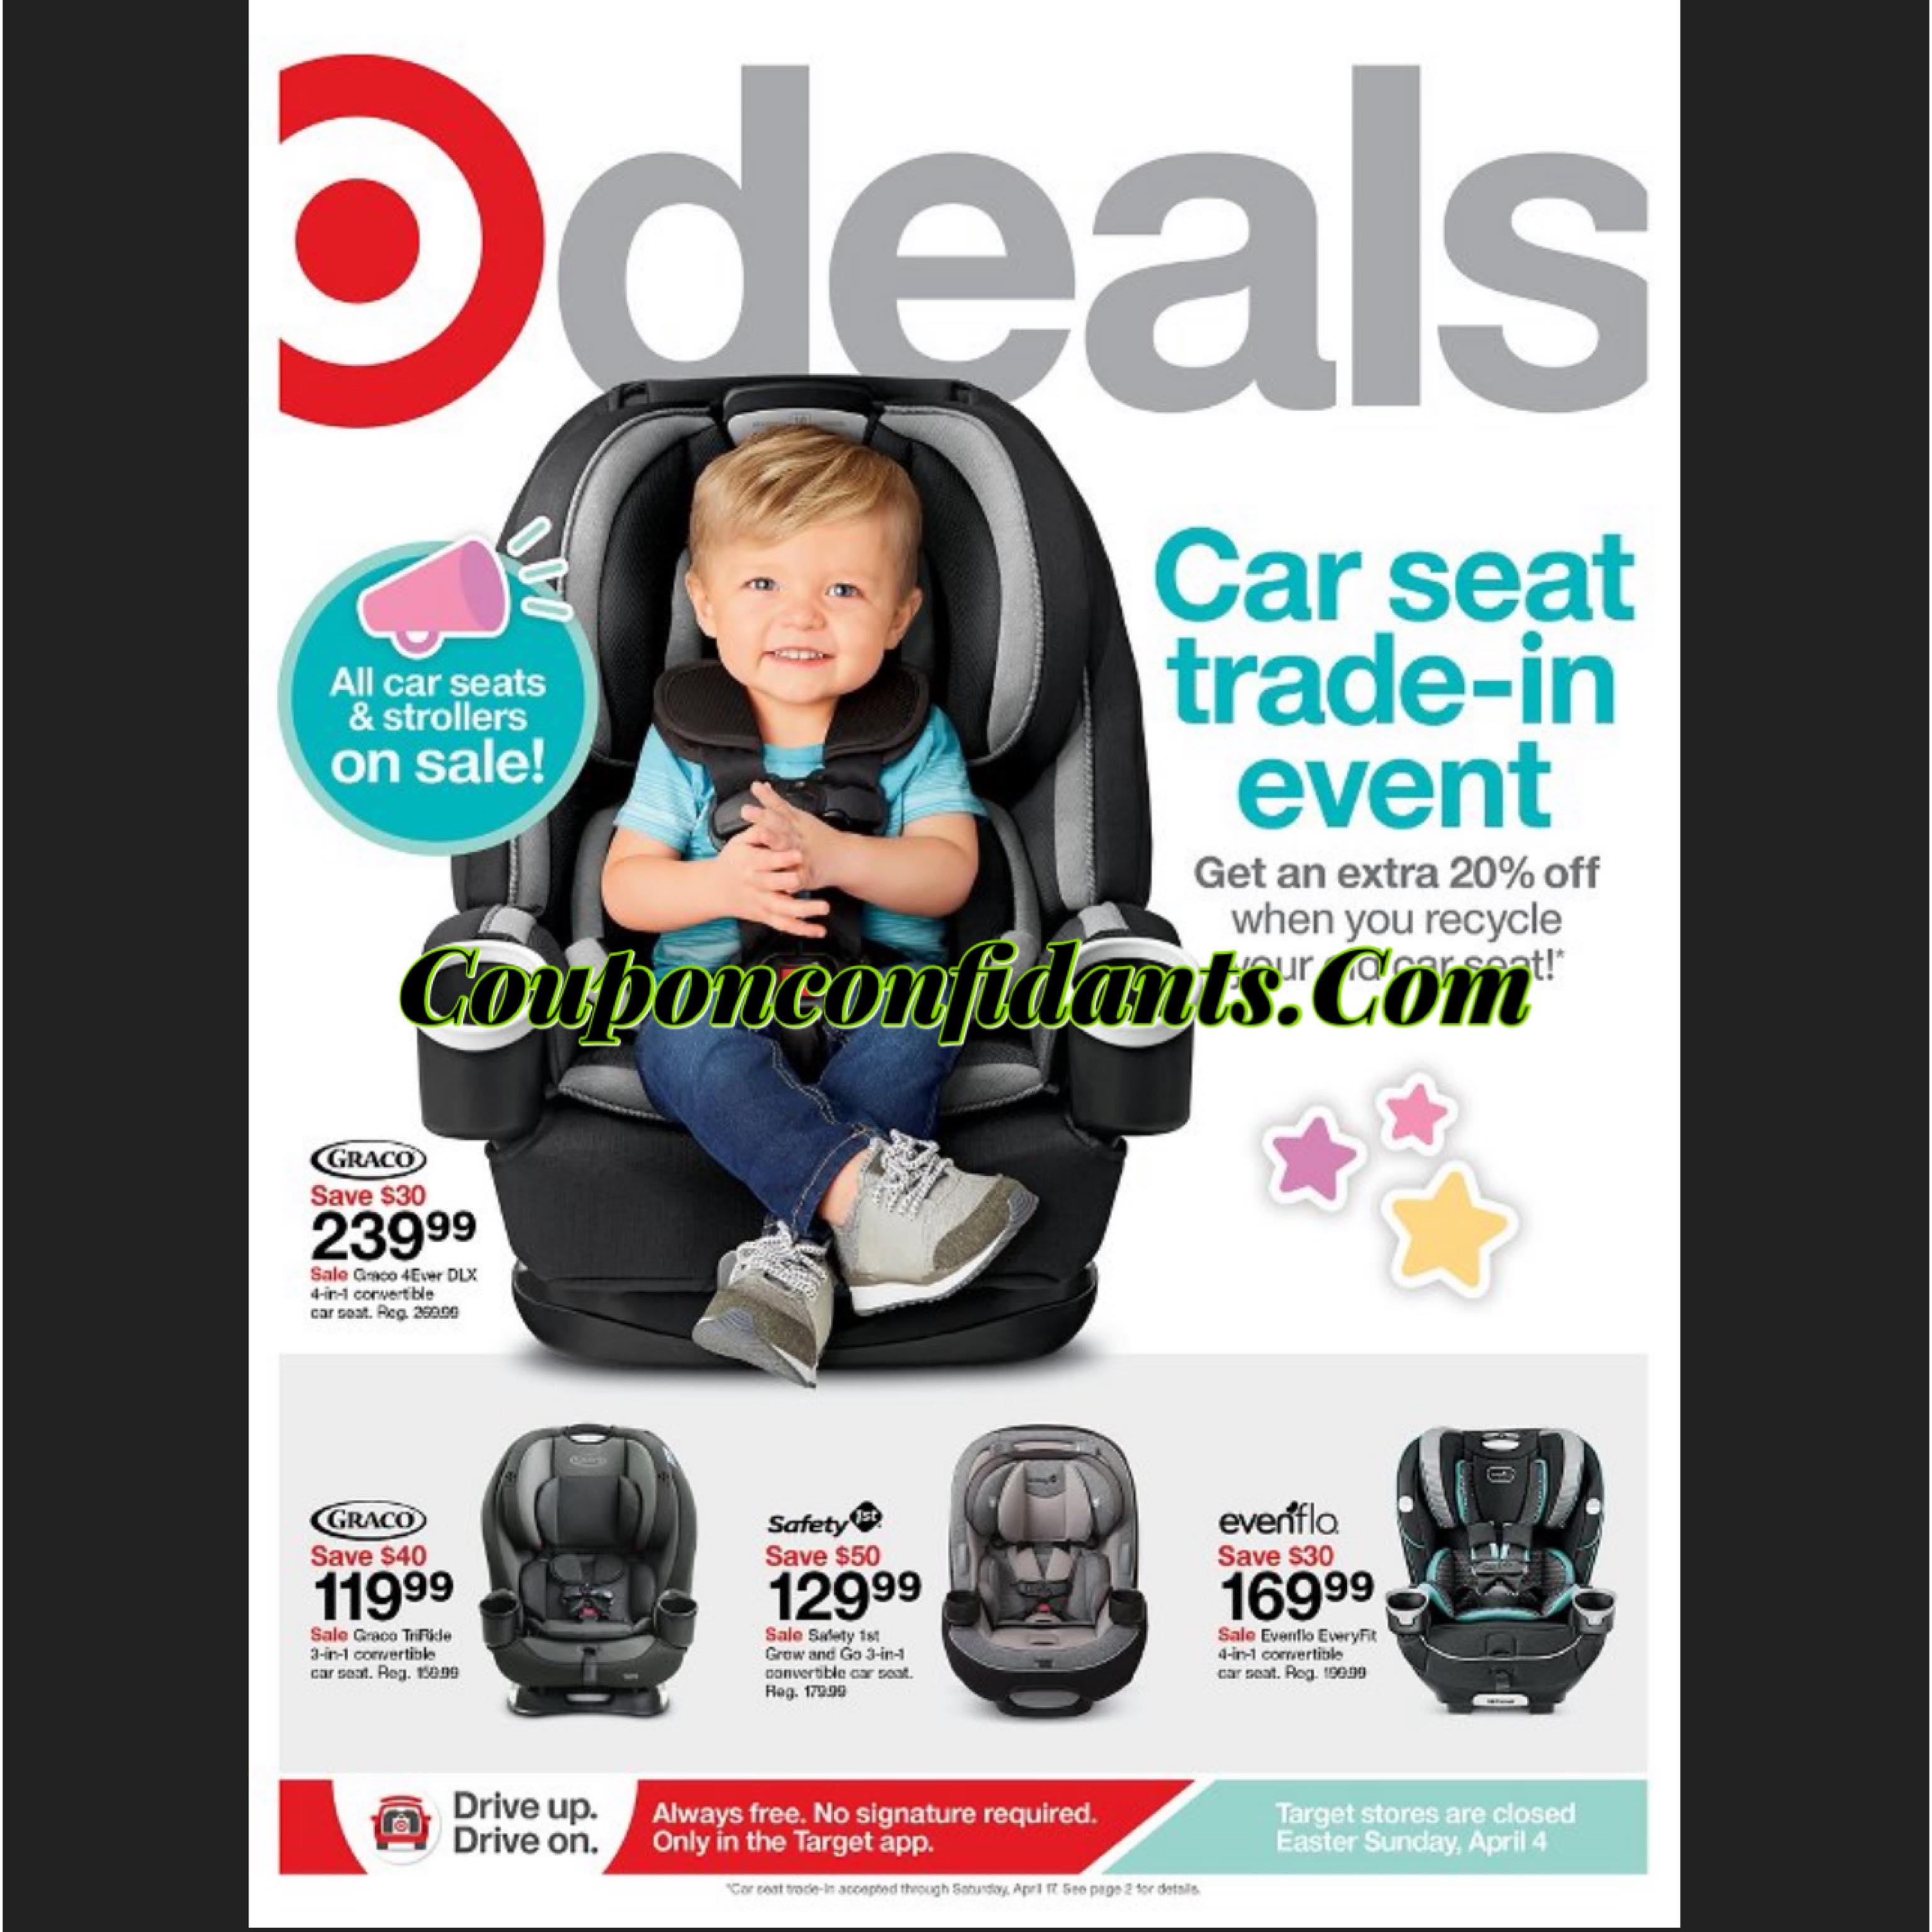 target-s-car-seat-event-is-on-coupon-confidants